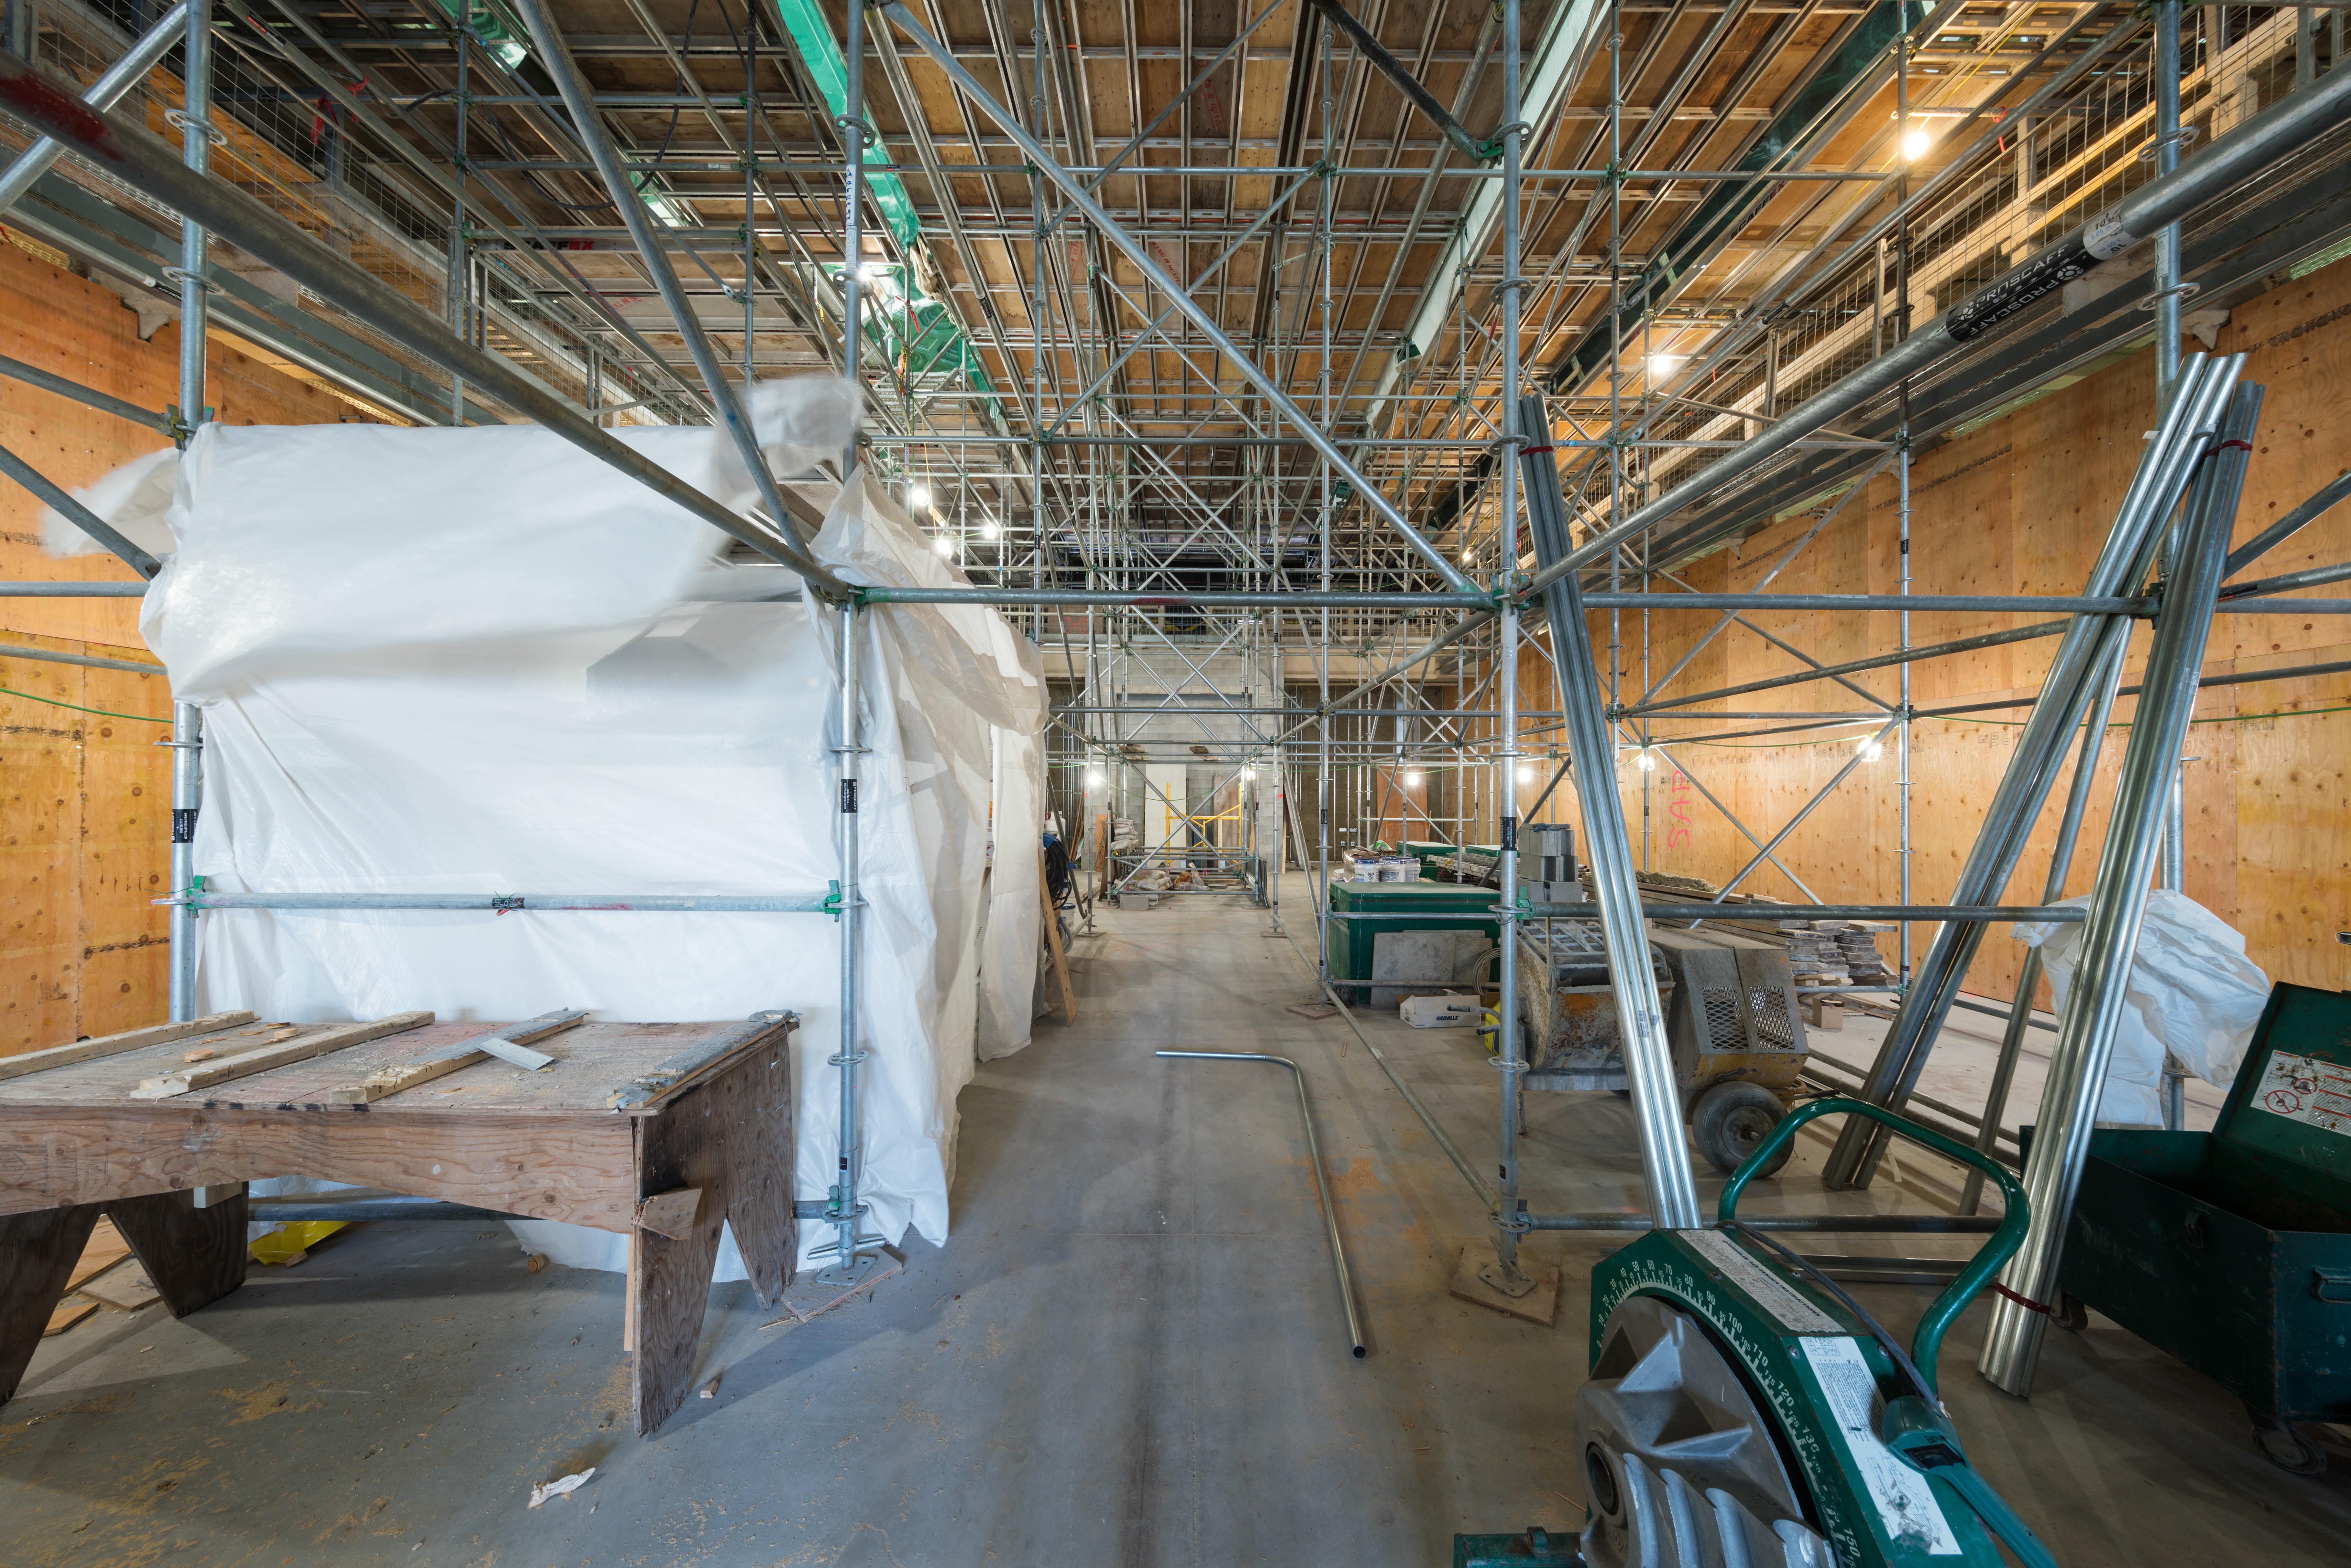 2017 - The same room with completed concrete floor. There is scaffolding to allow workers to restore the ceiling.